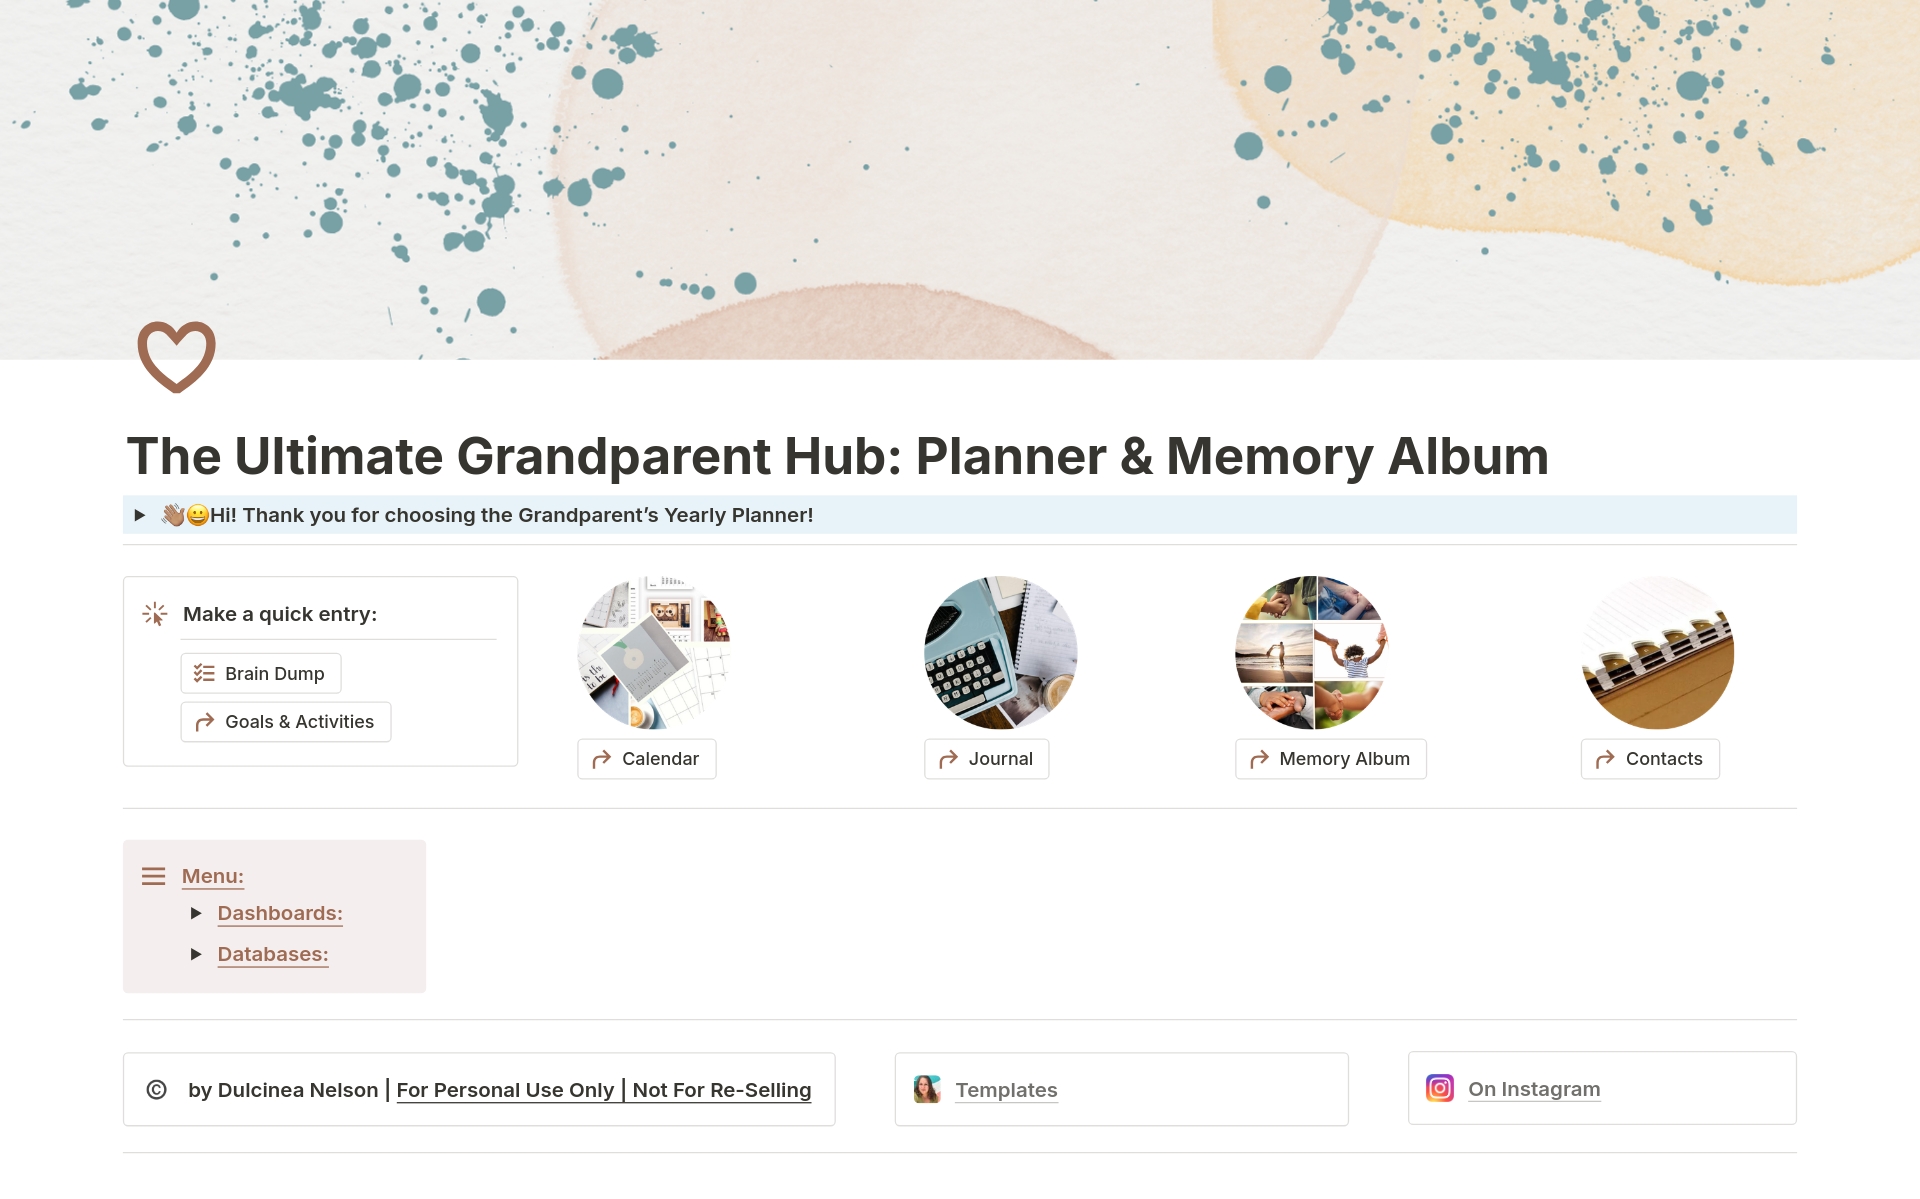 The Ultimate Grandparent Hub: Planner & Memory Album is the ultimate activity planner & memory album rolled up in one aesthetically pleasing package. You'll enjoy keeping track of all your favorite moments you experience with your grandchildren for years to come! 